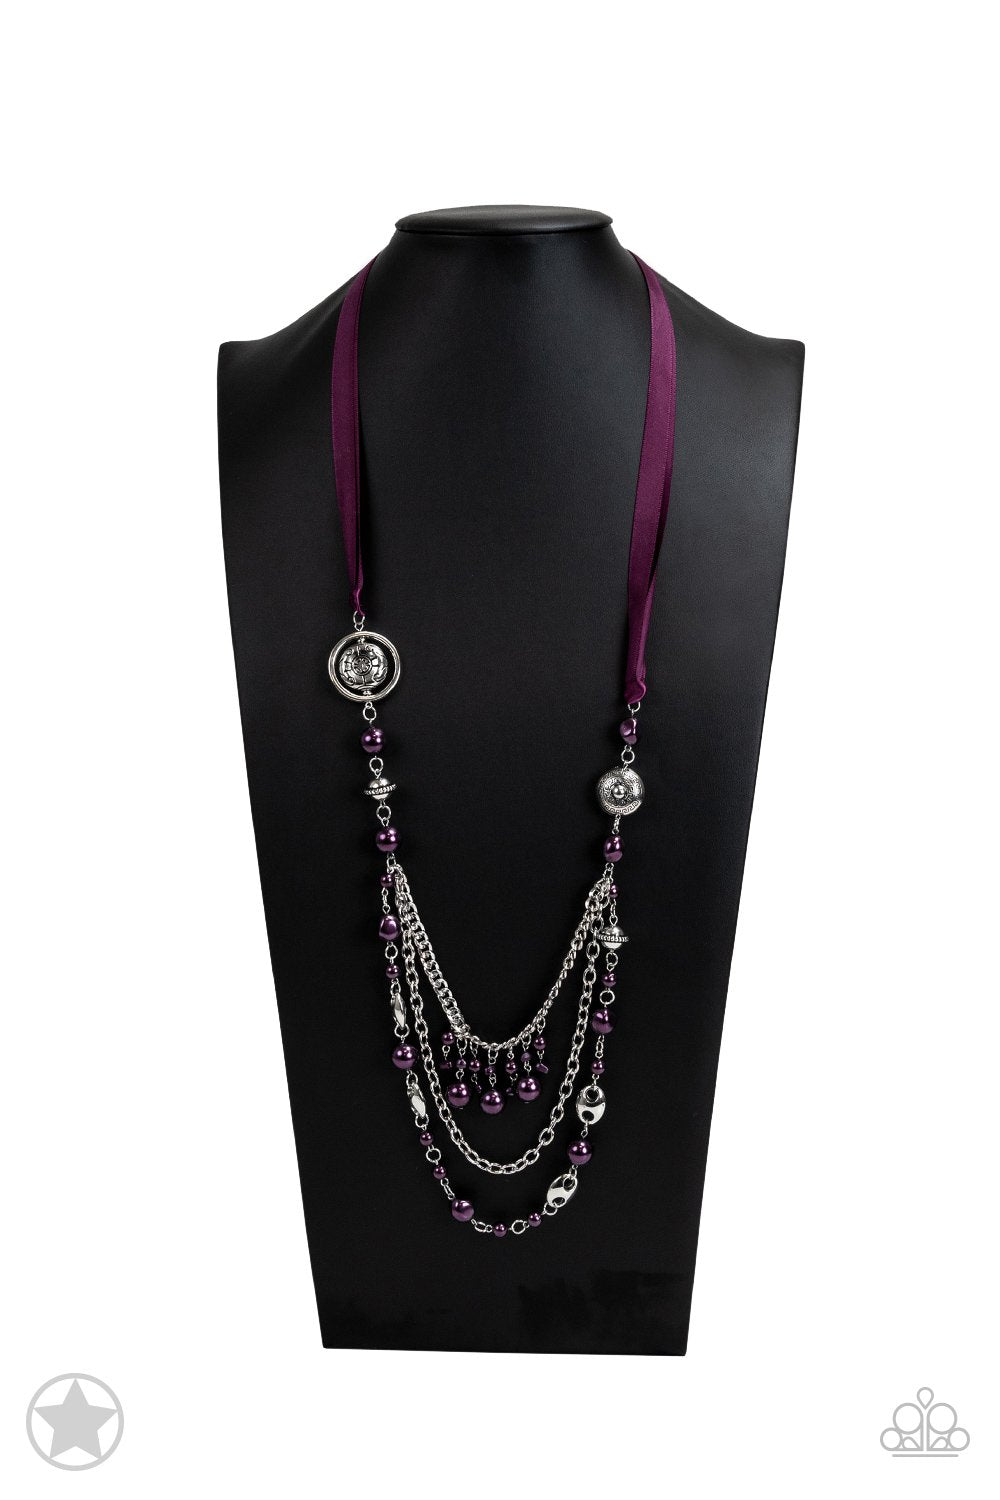 All The Trimmings Purple Ribbon Necklace - Paparazzi Accessories- on bust -CarasShop.com - $5 Jewelry by Cara Jewels